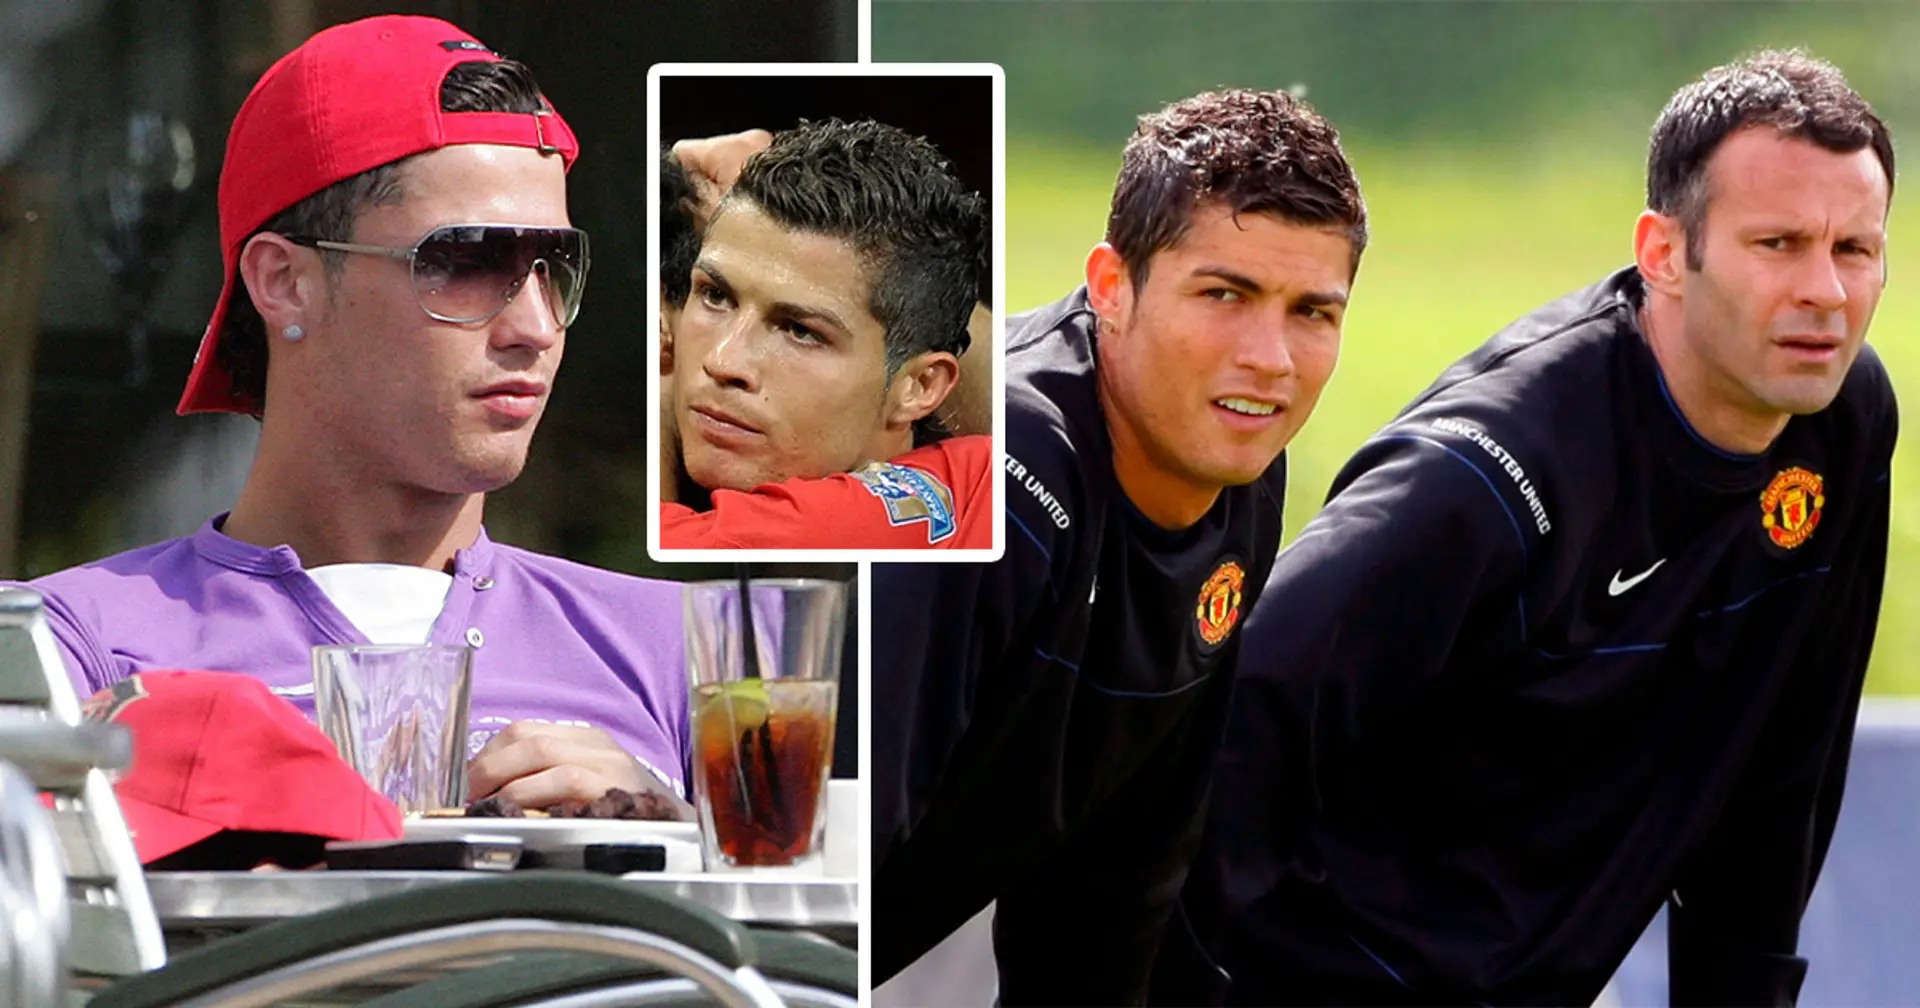 'I drink what I want, Giggsy': Ryan Giggs once slammed Cristiano Ronaldo for drinking Coca-Cola for breakfast